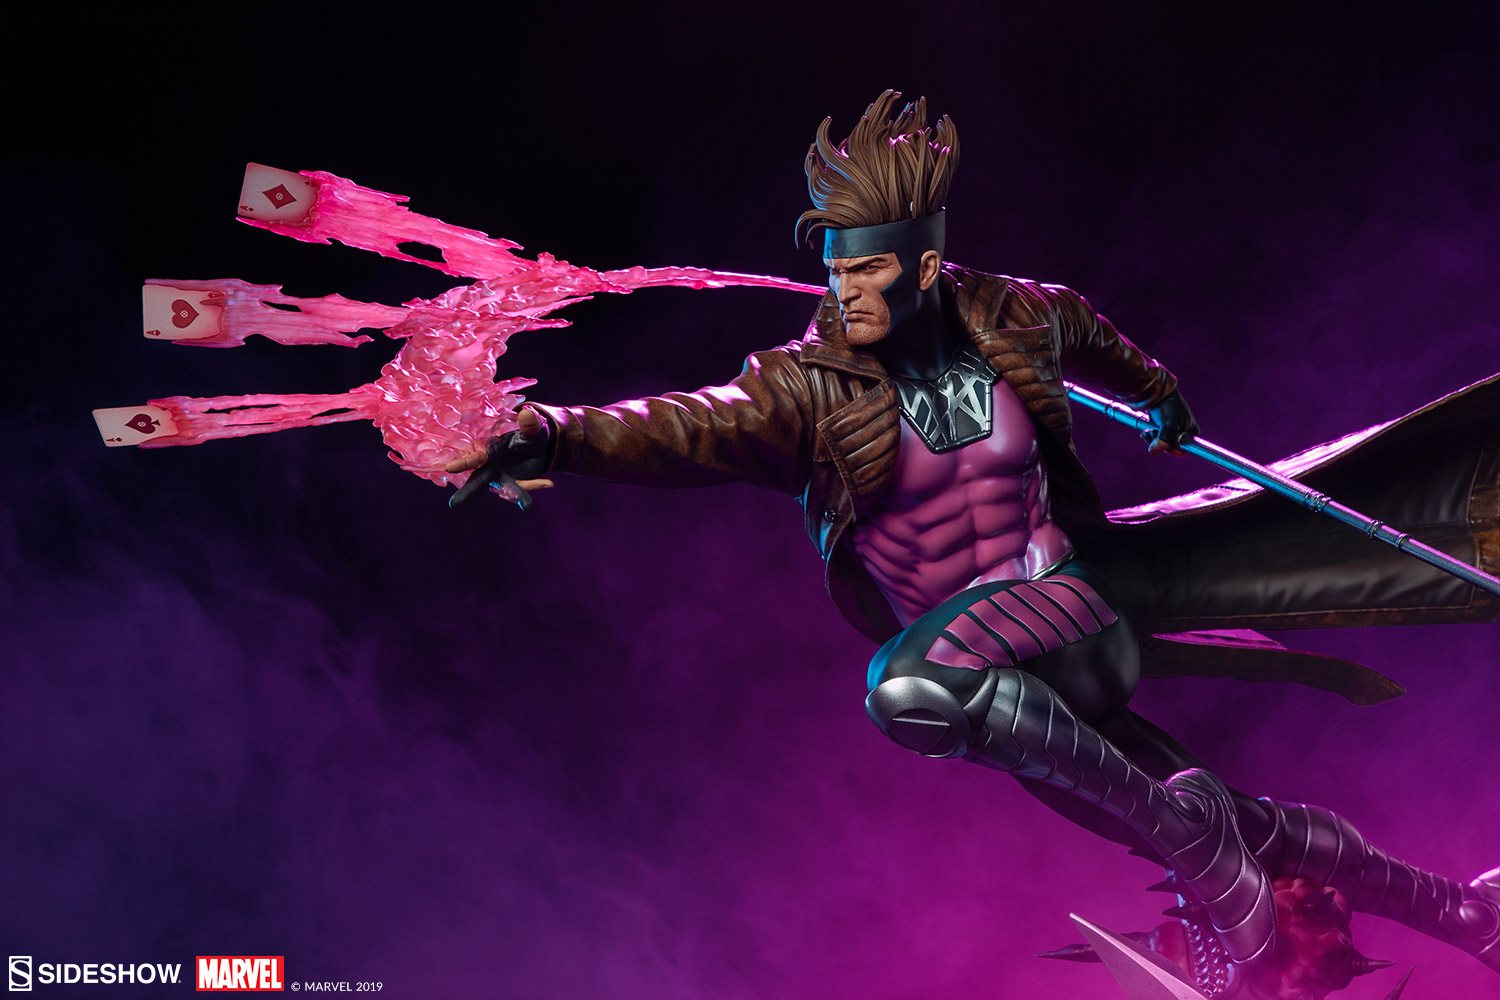 https://www.sideshow.com/storage/product-images/300727/gambit_marvel_gallery_5d66e7d6bff53.jpg